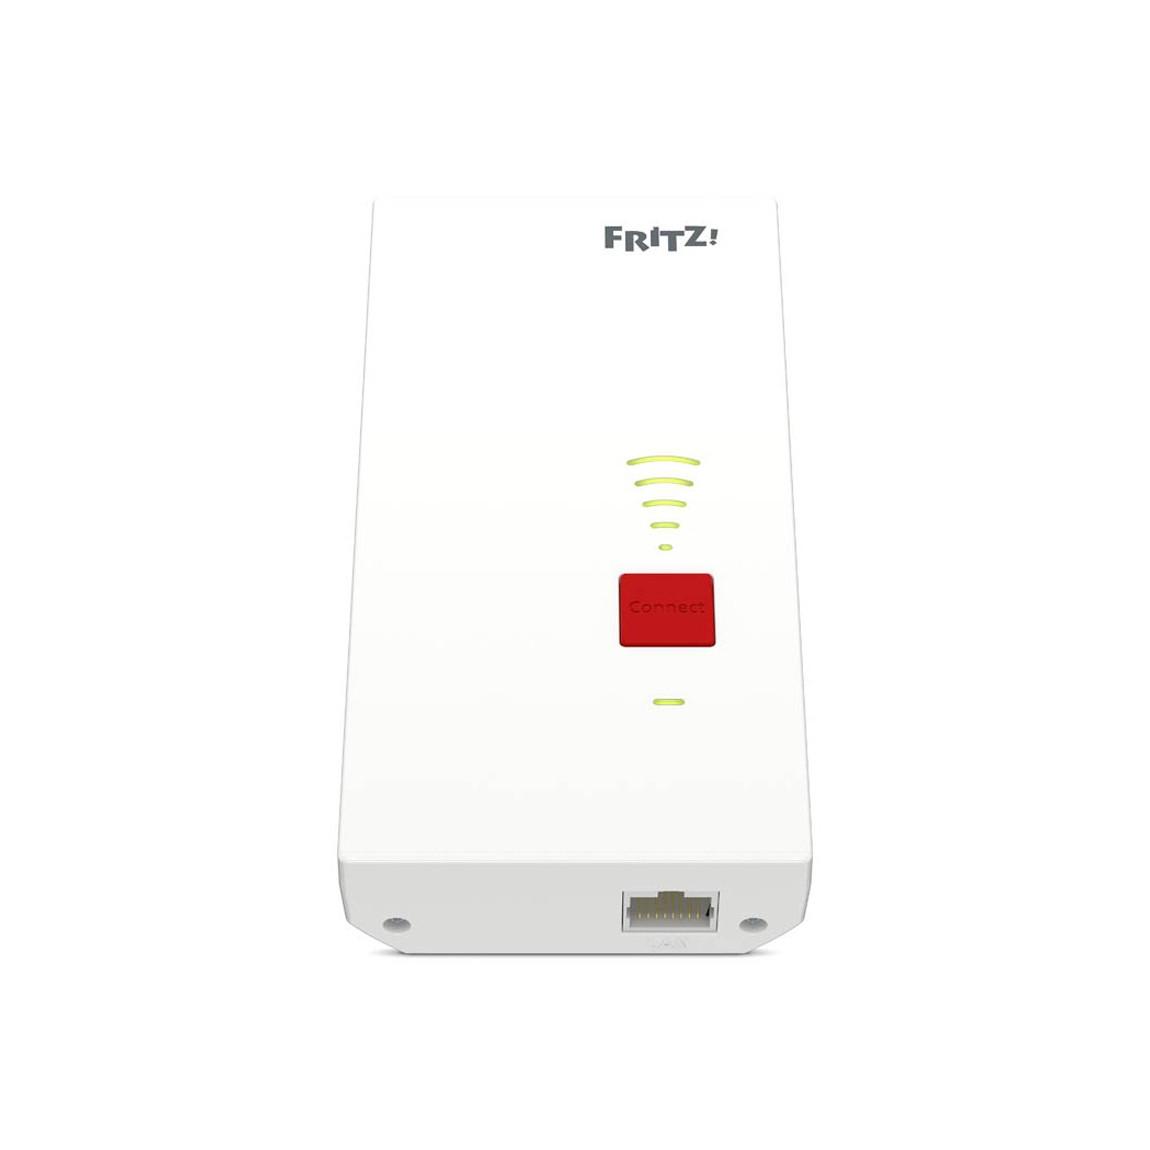 AVM FRITZ!WLAN Repeater 2400 frontale Ansicht